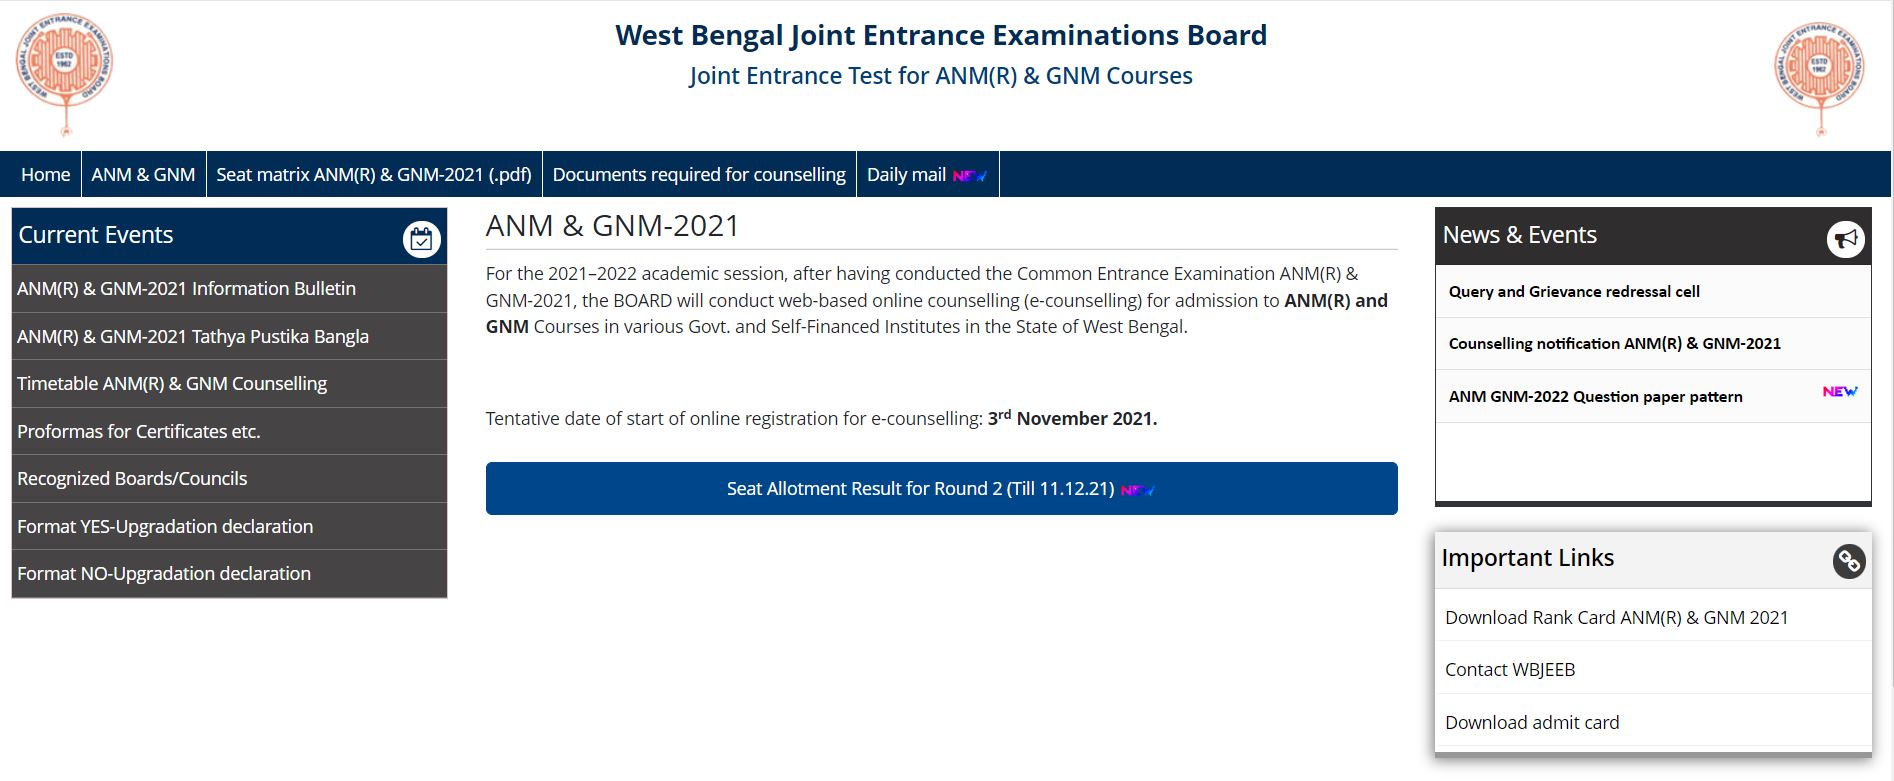 WBJEE ANM GNM 2nd Round Seat Allotment Result 2021 